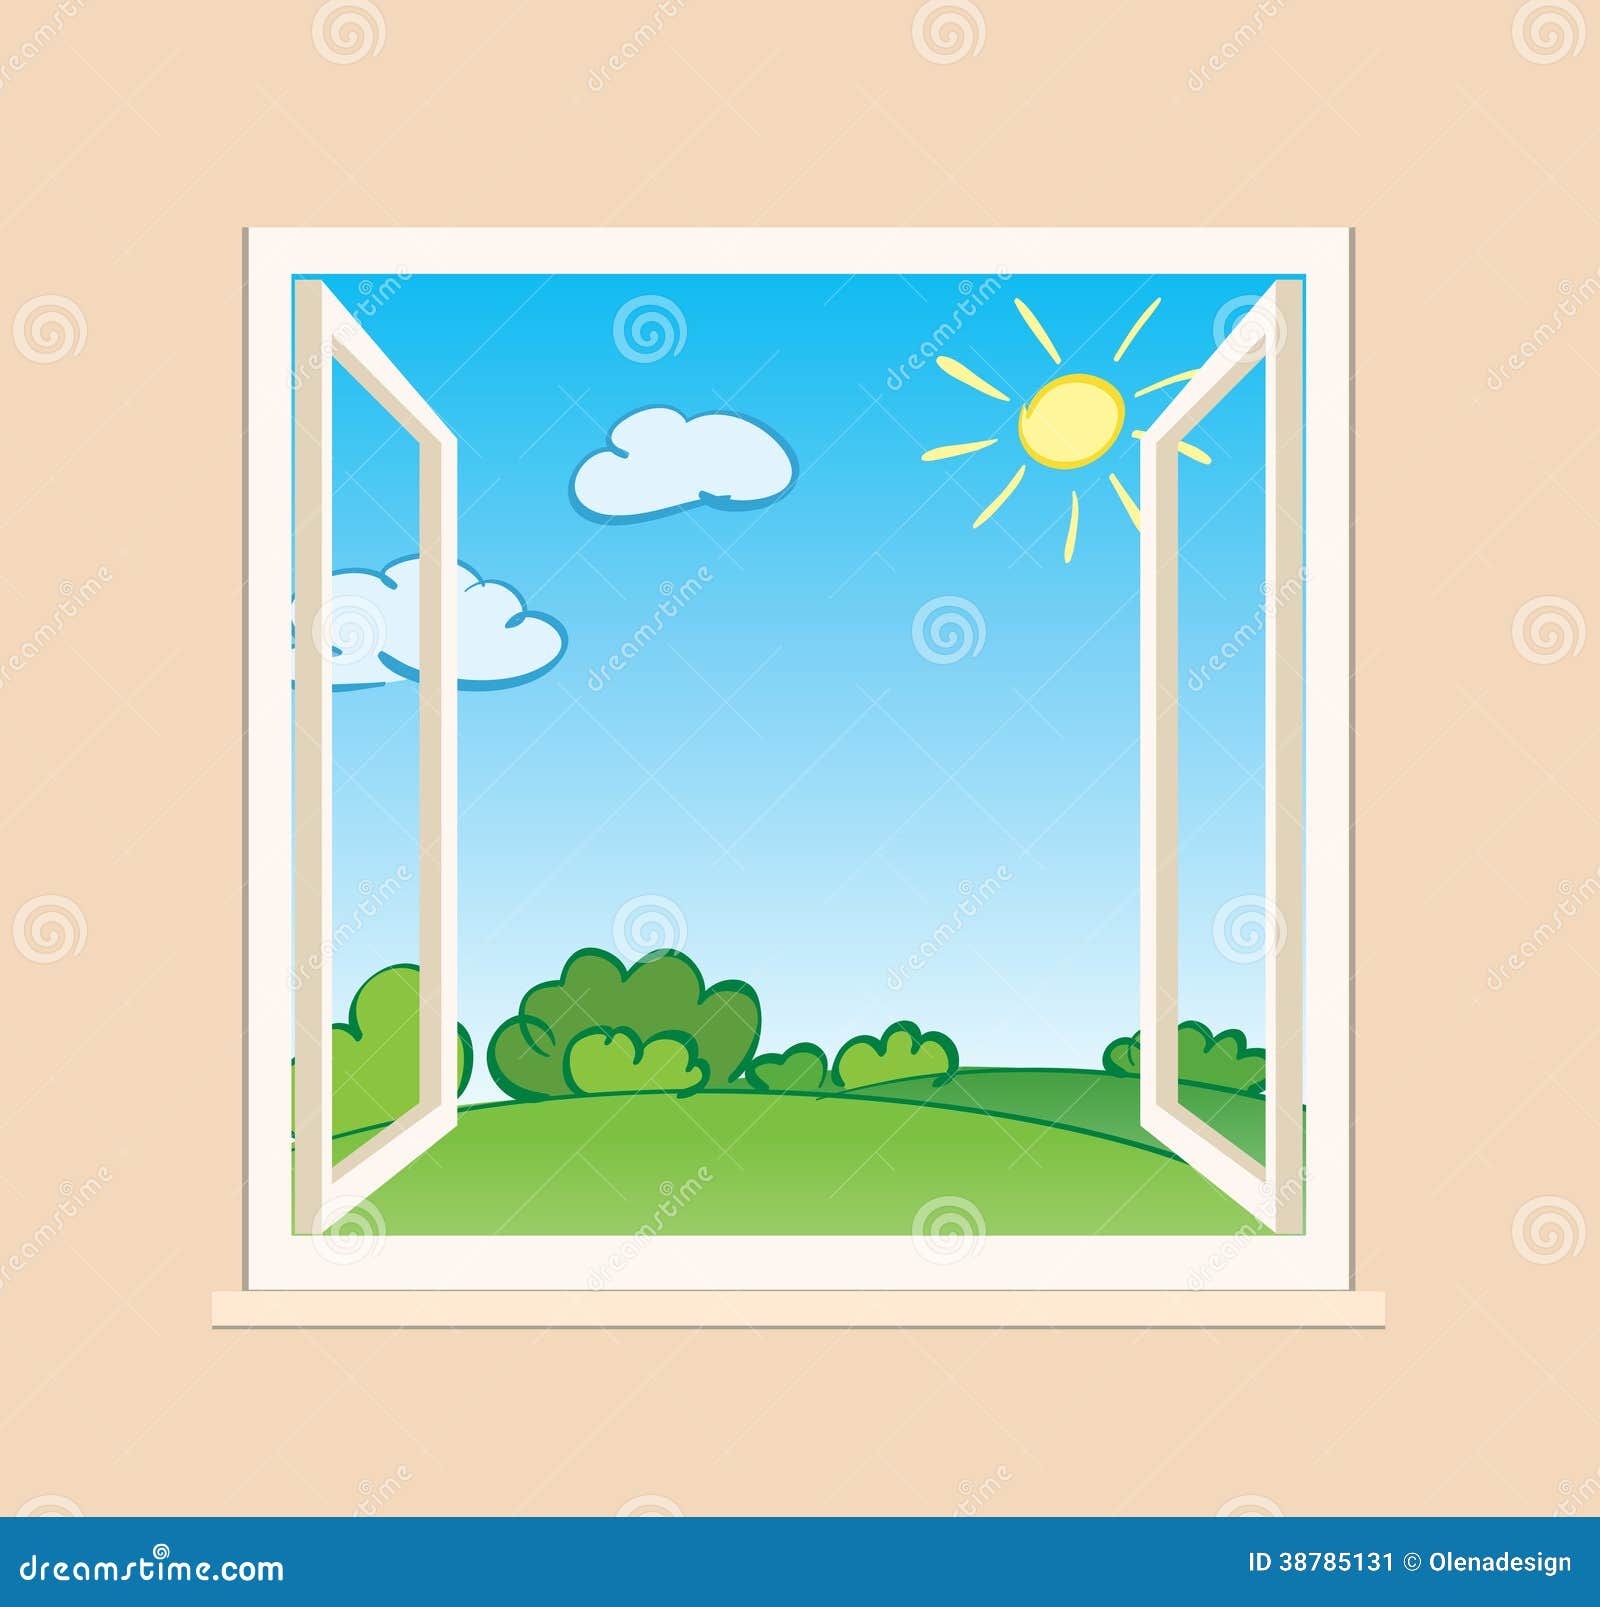 clipart for windows 8.1 - photo #16